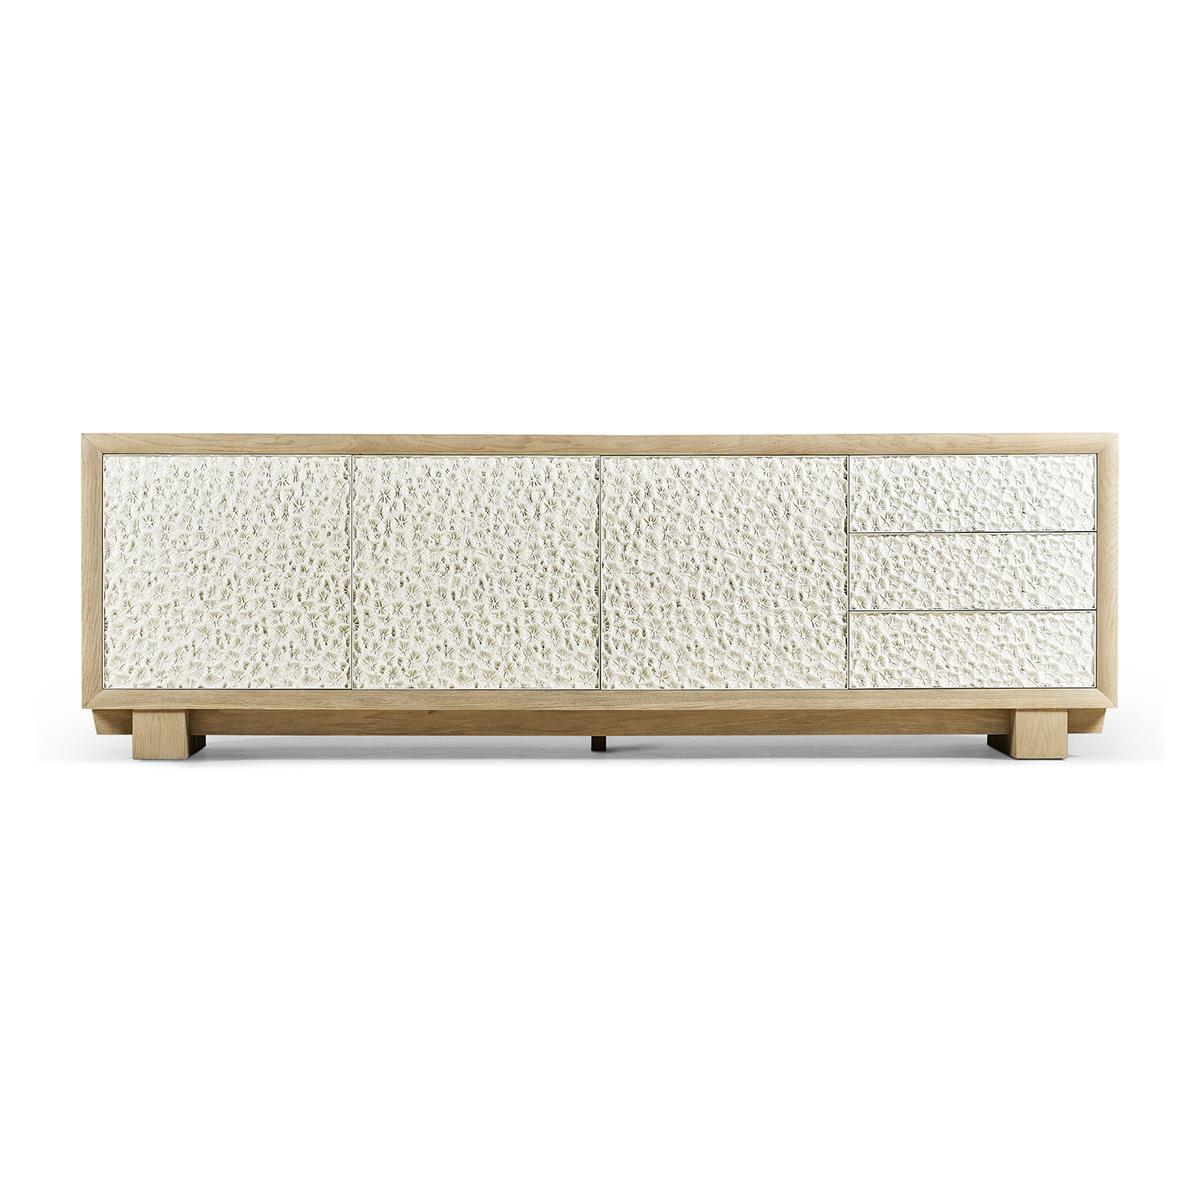 Modern coral media cabinet, inspired by fossilized coral, it boasts an intricate pattern on metal doors produced by lost wax casting. Resting on a hefty linear base, the solid bleached oak case has a primitive and contemporary aesthetic.

Three